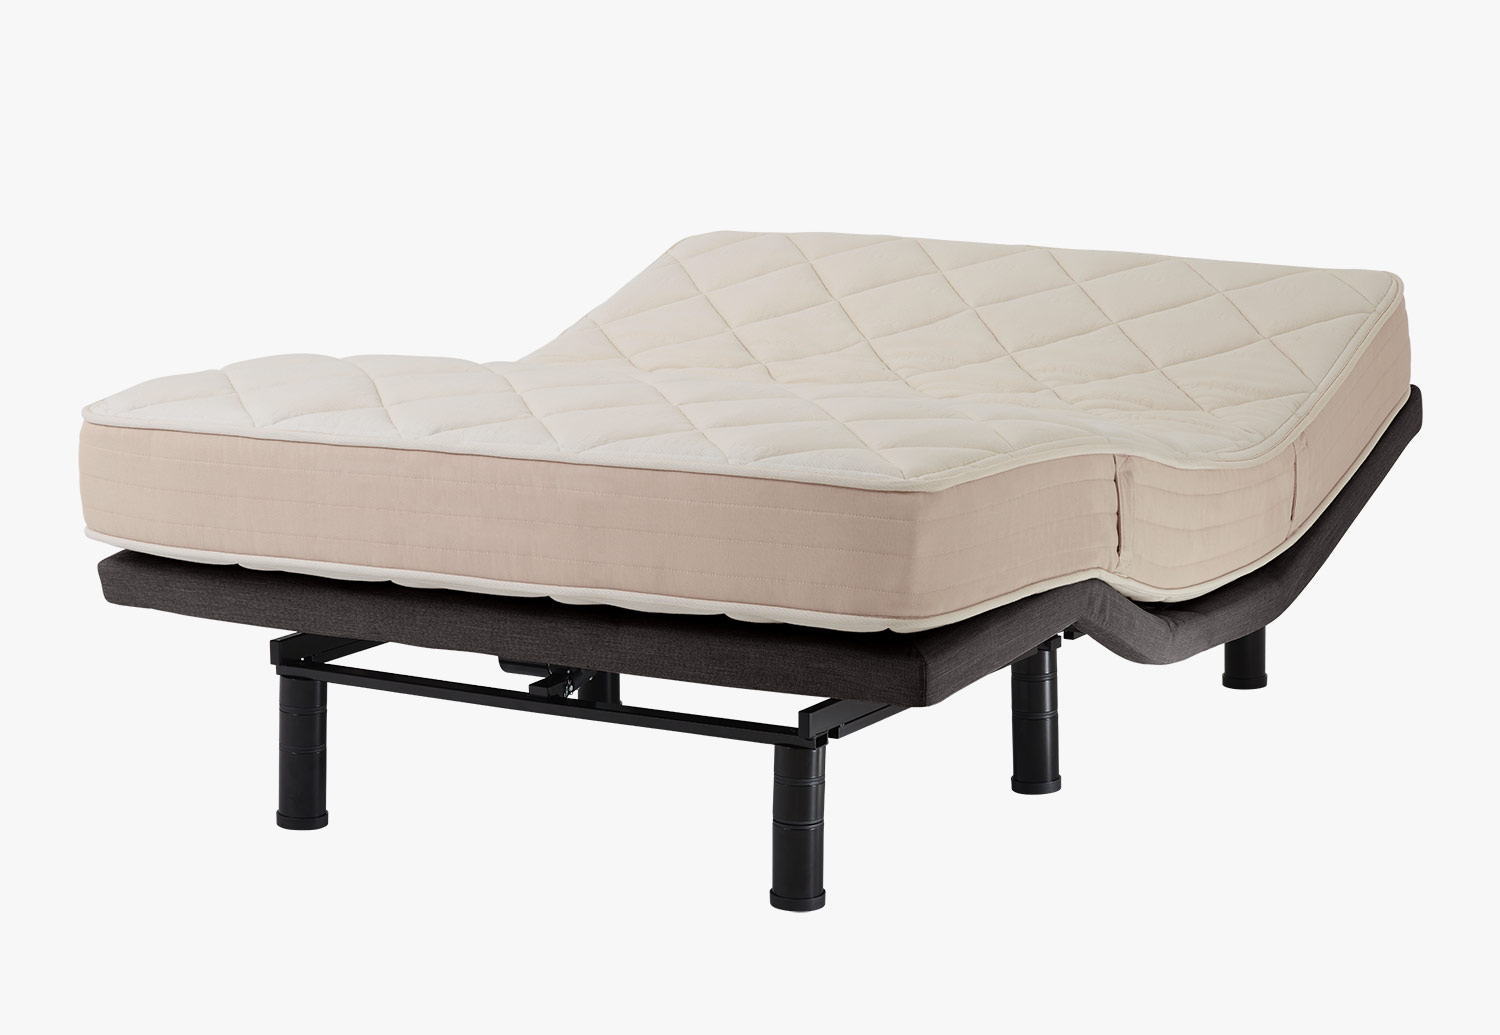 Cloud Comfort - The #1 Mattress Store l Free Delivery l Best Prices